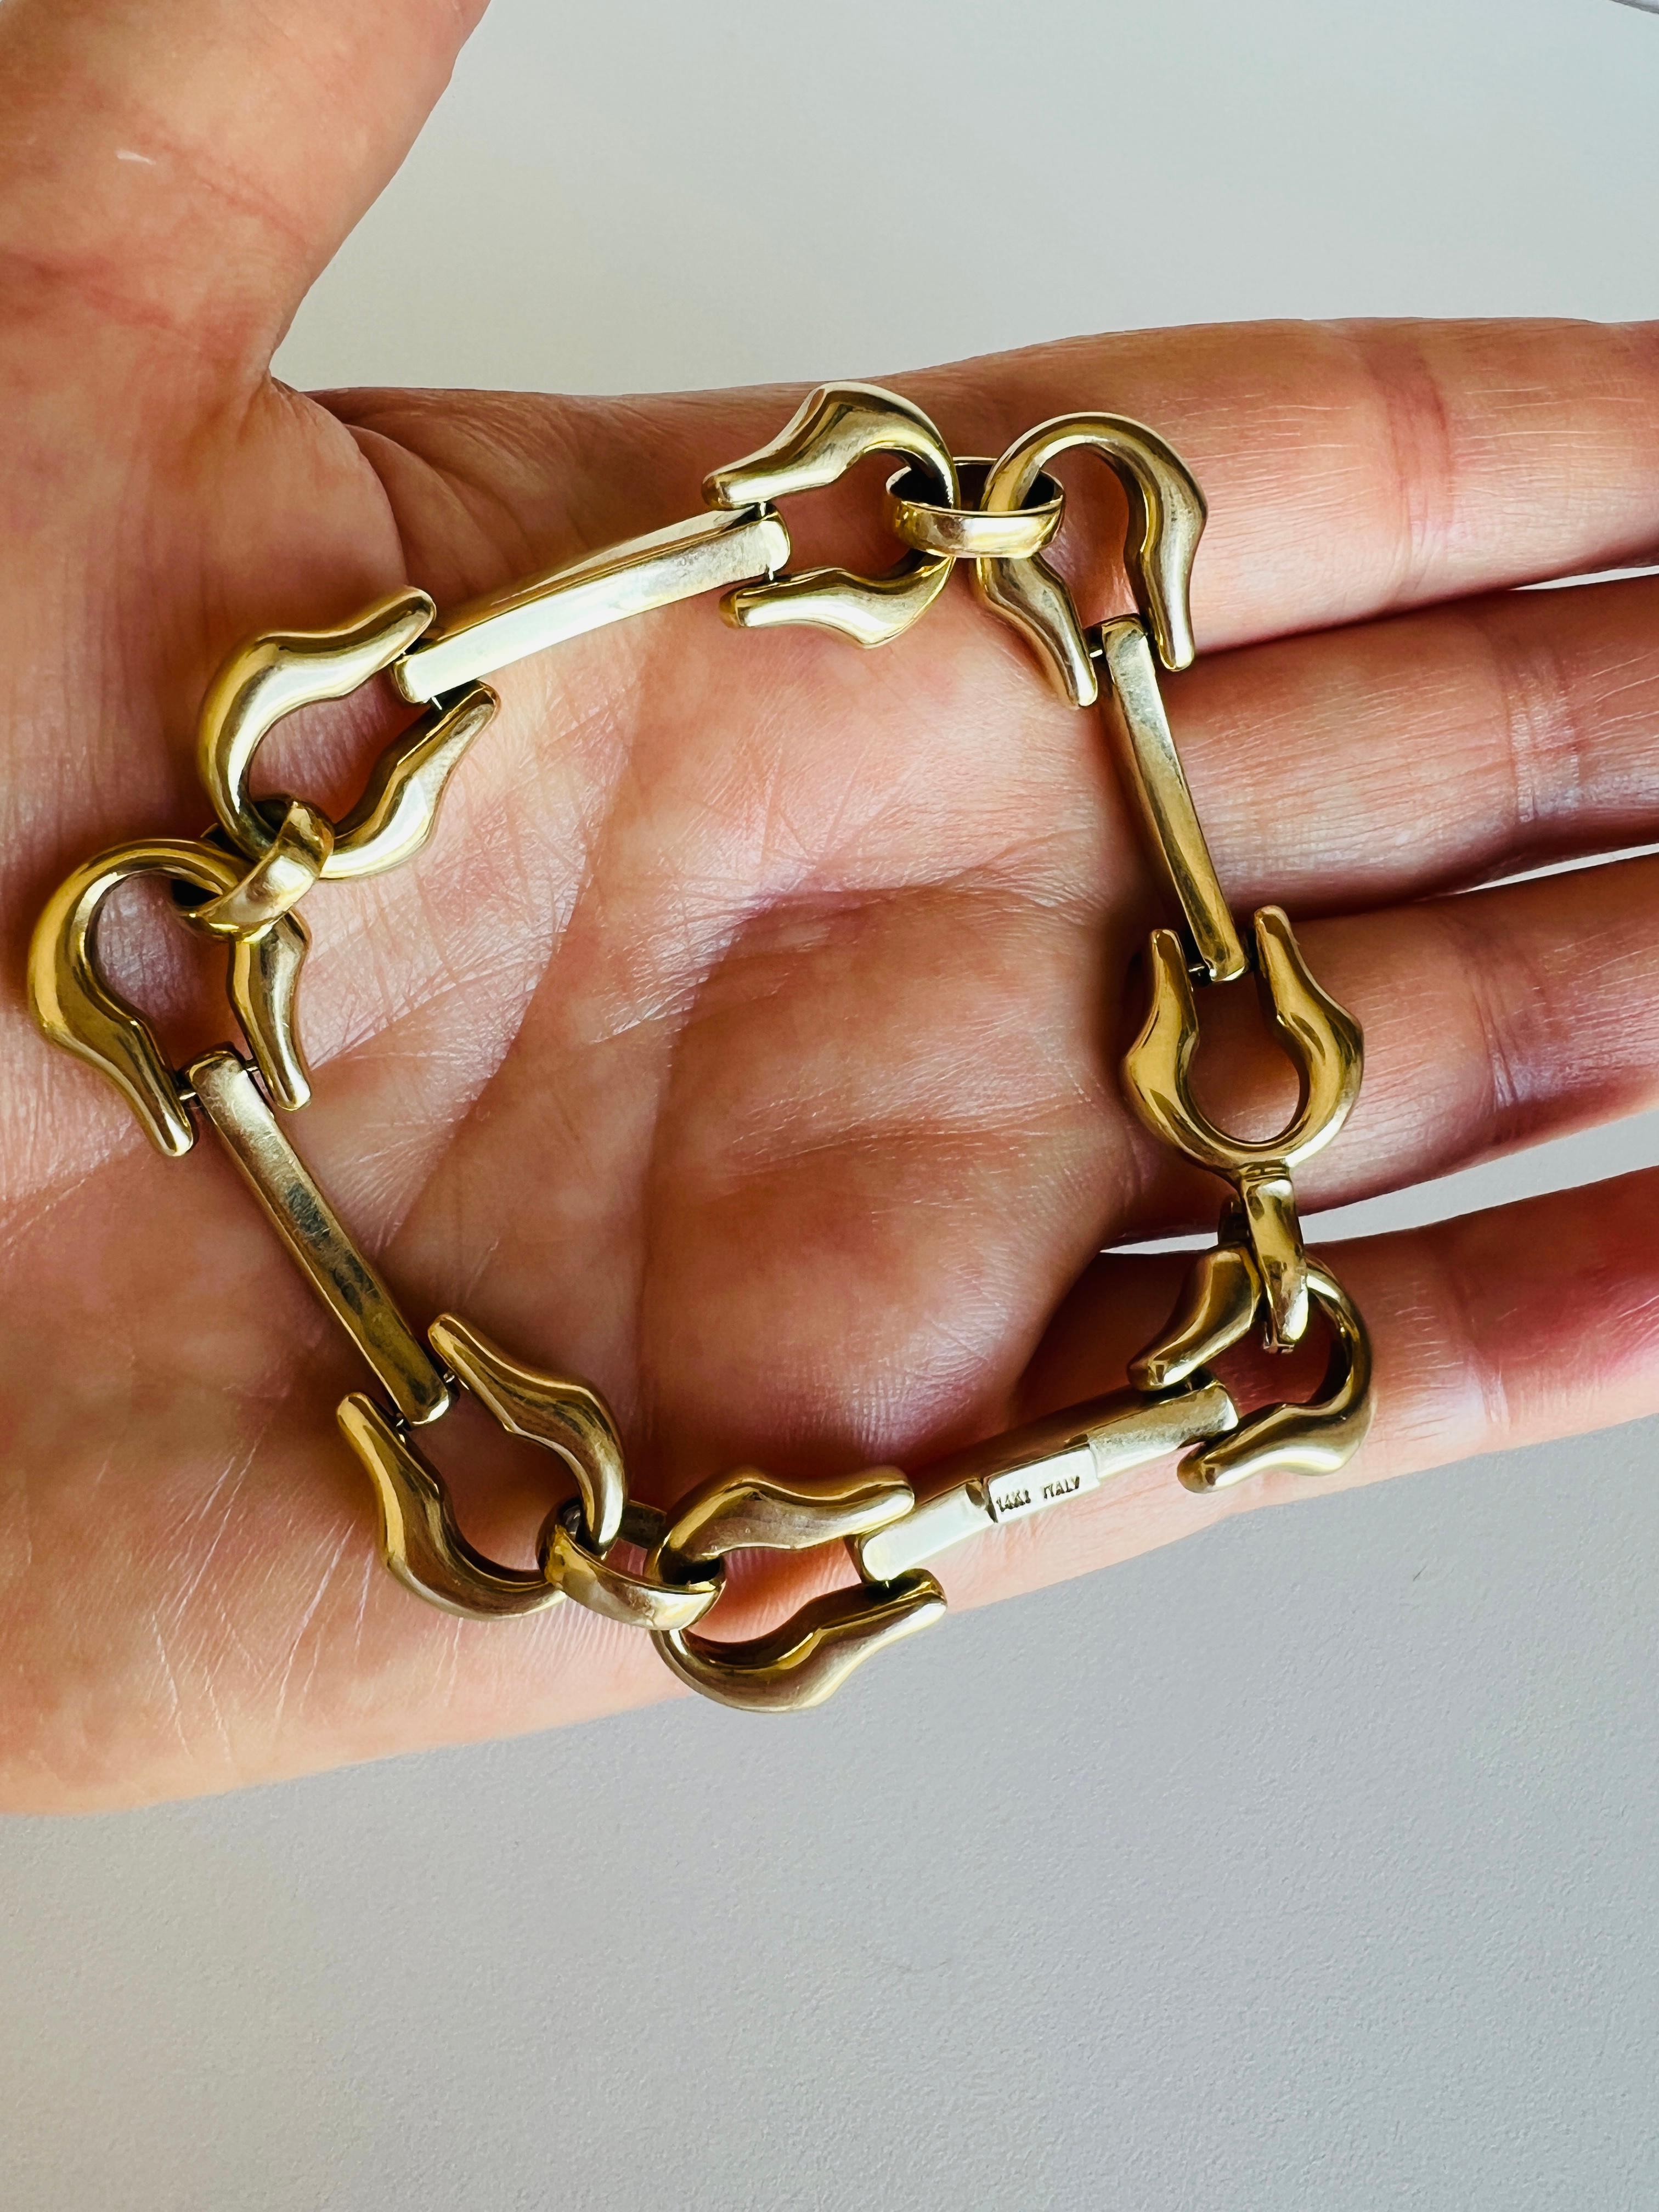 1940s 14k Italian Yellow & White Gold Retro Bracelet Horse Bit Cable Chain Link For Sale 1